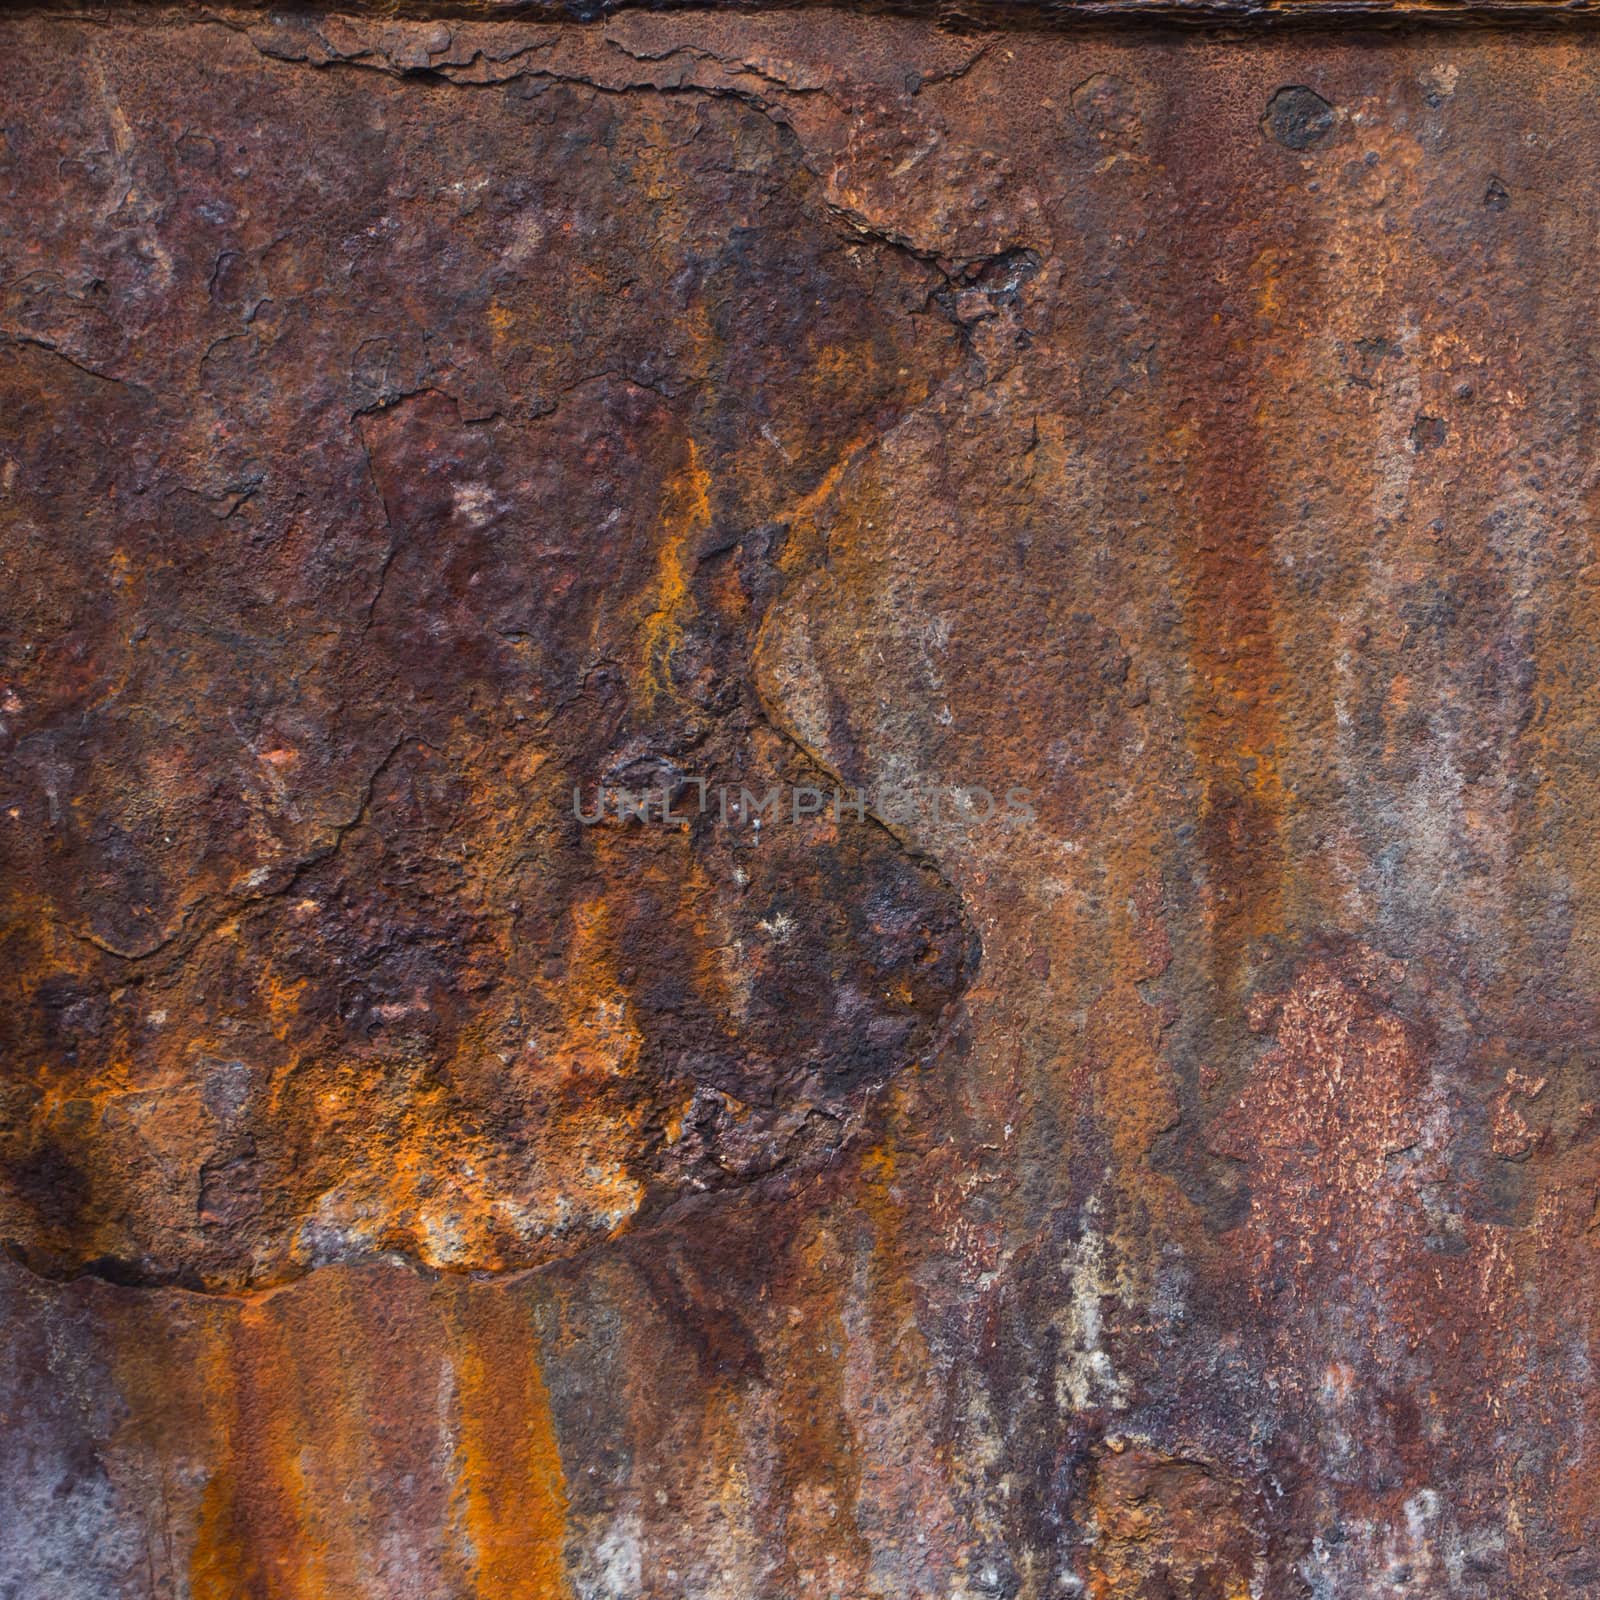 Rusty metal, grunge texture for background